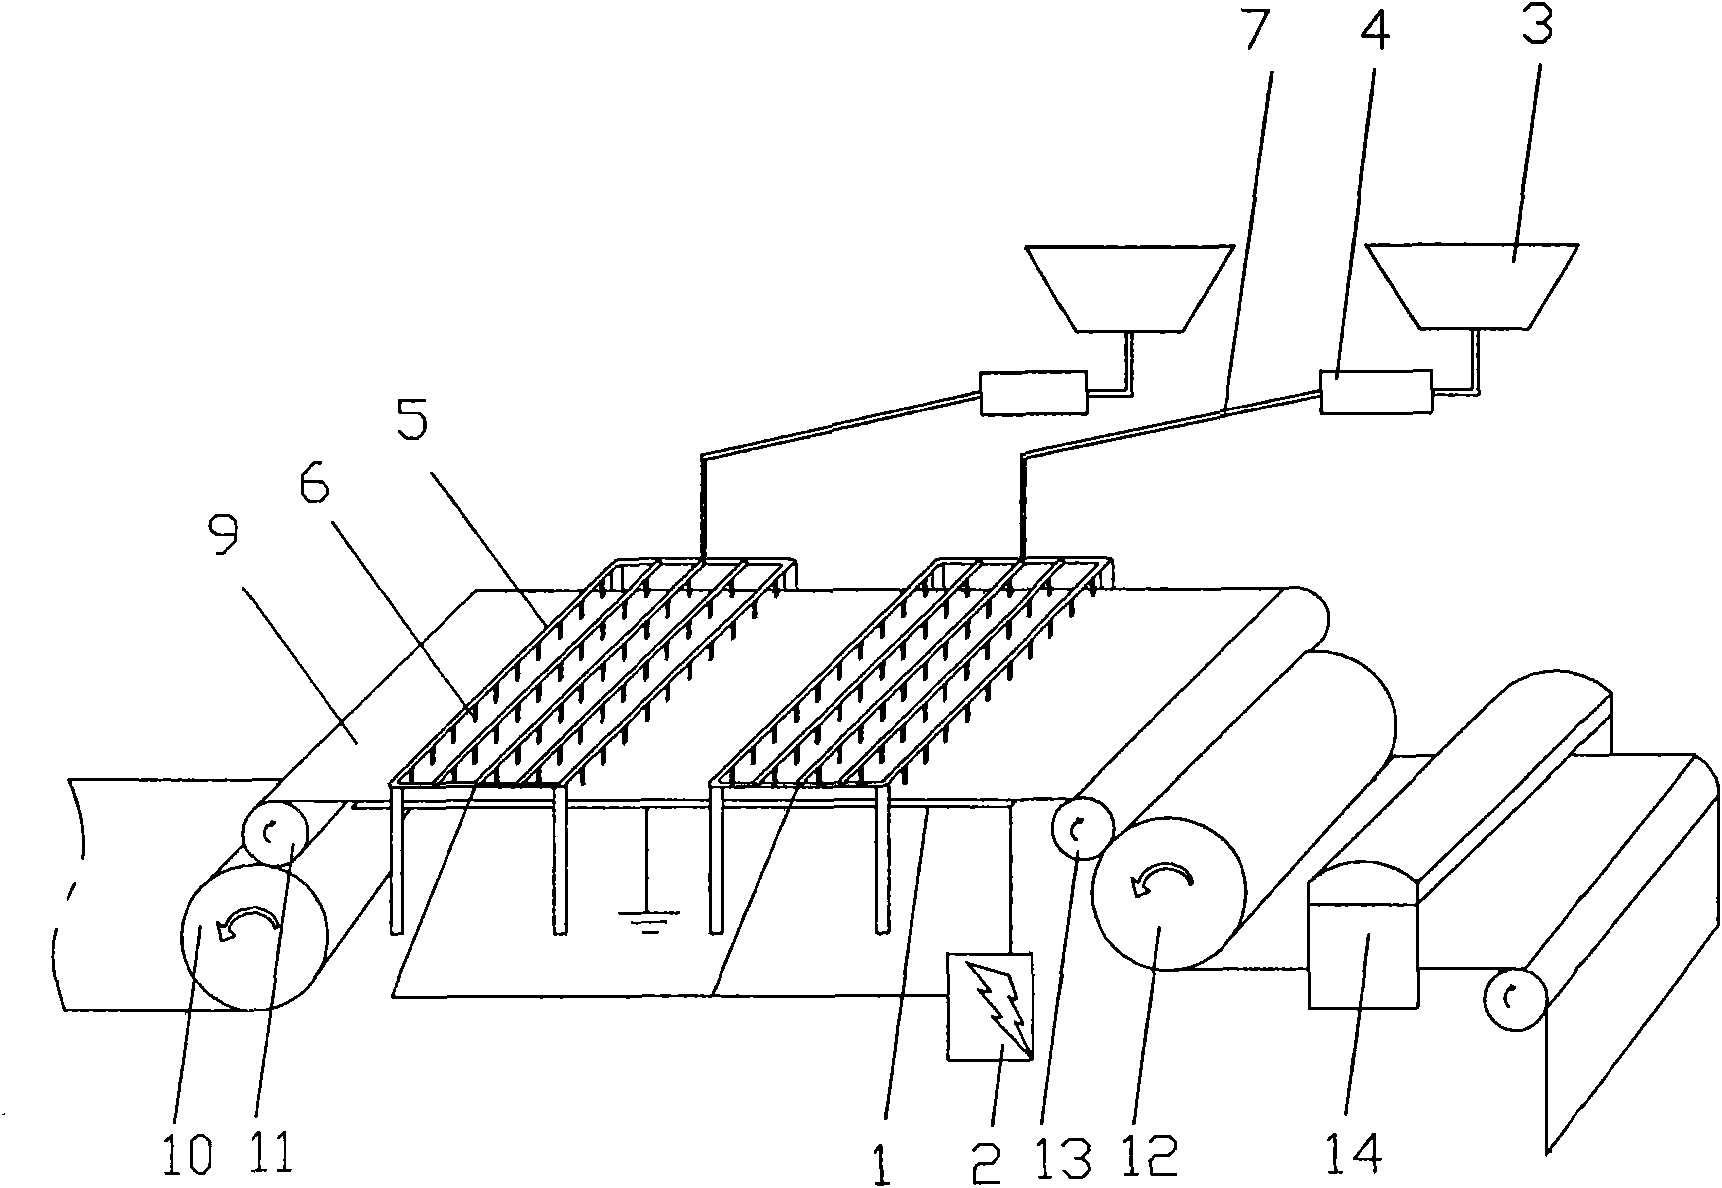 Array multi-nozzle electrospinning device